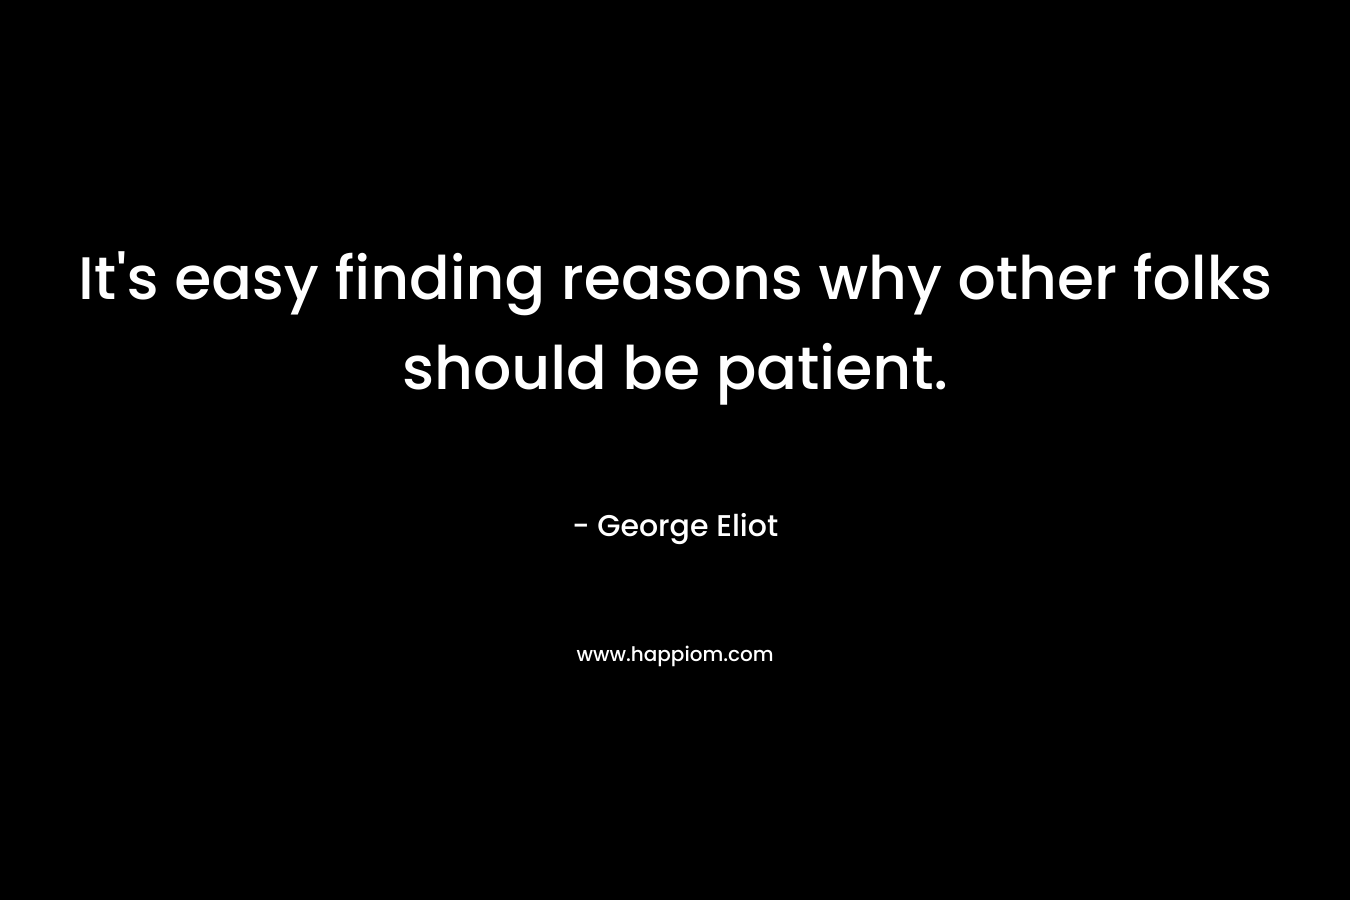 It’s easy finding reasons why other folks should be patient. – George Eliot